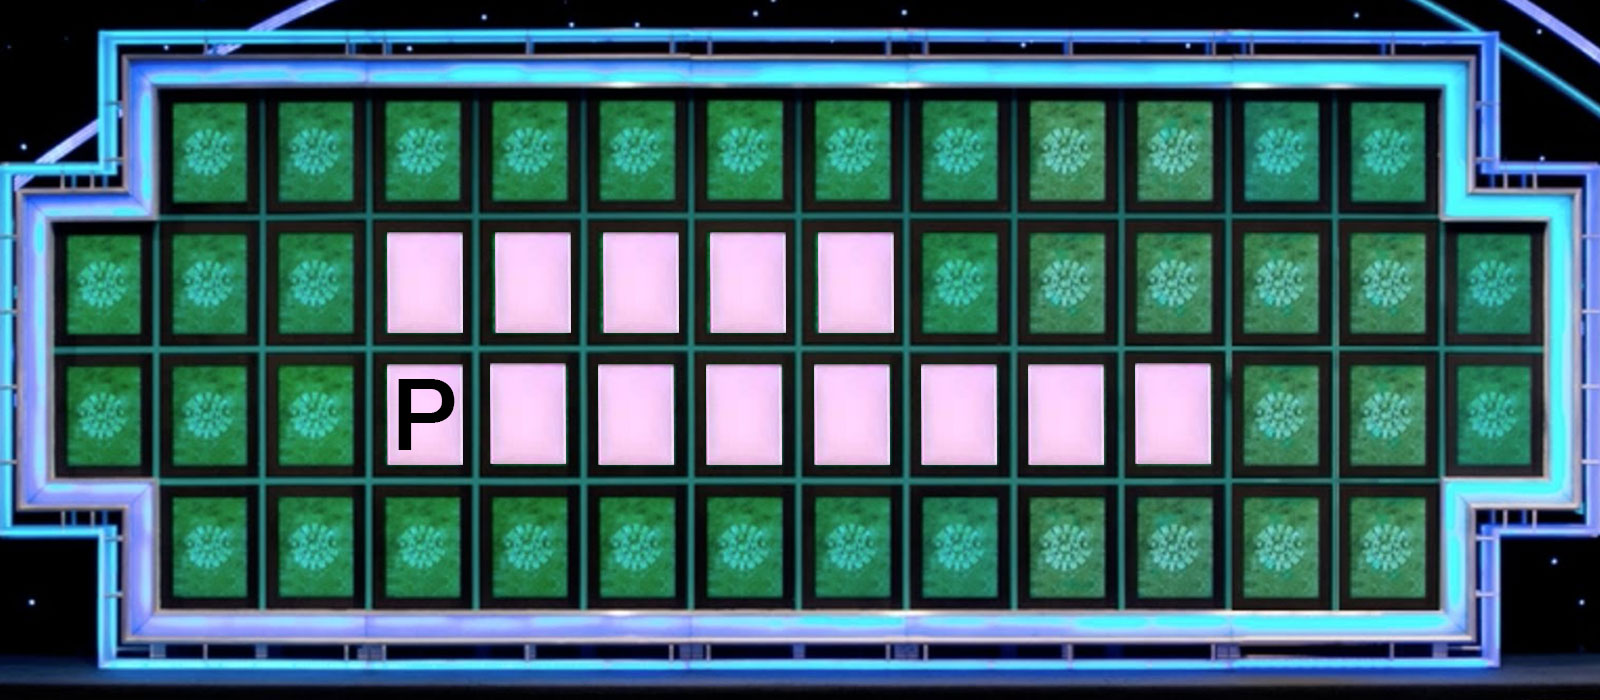 Can You Solve These Wheel of Fortune Puzzles? Quiz 915